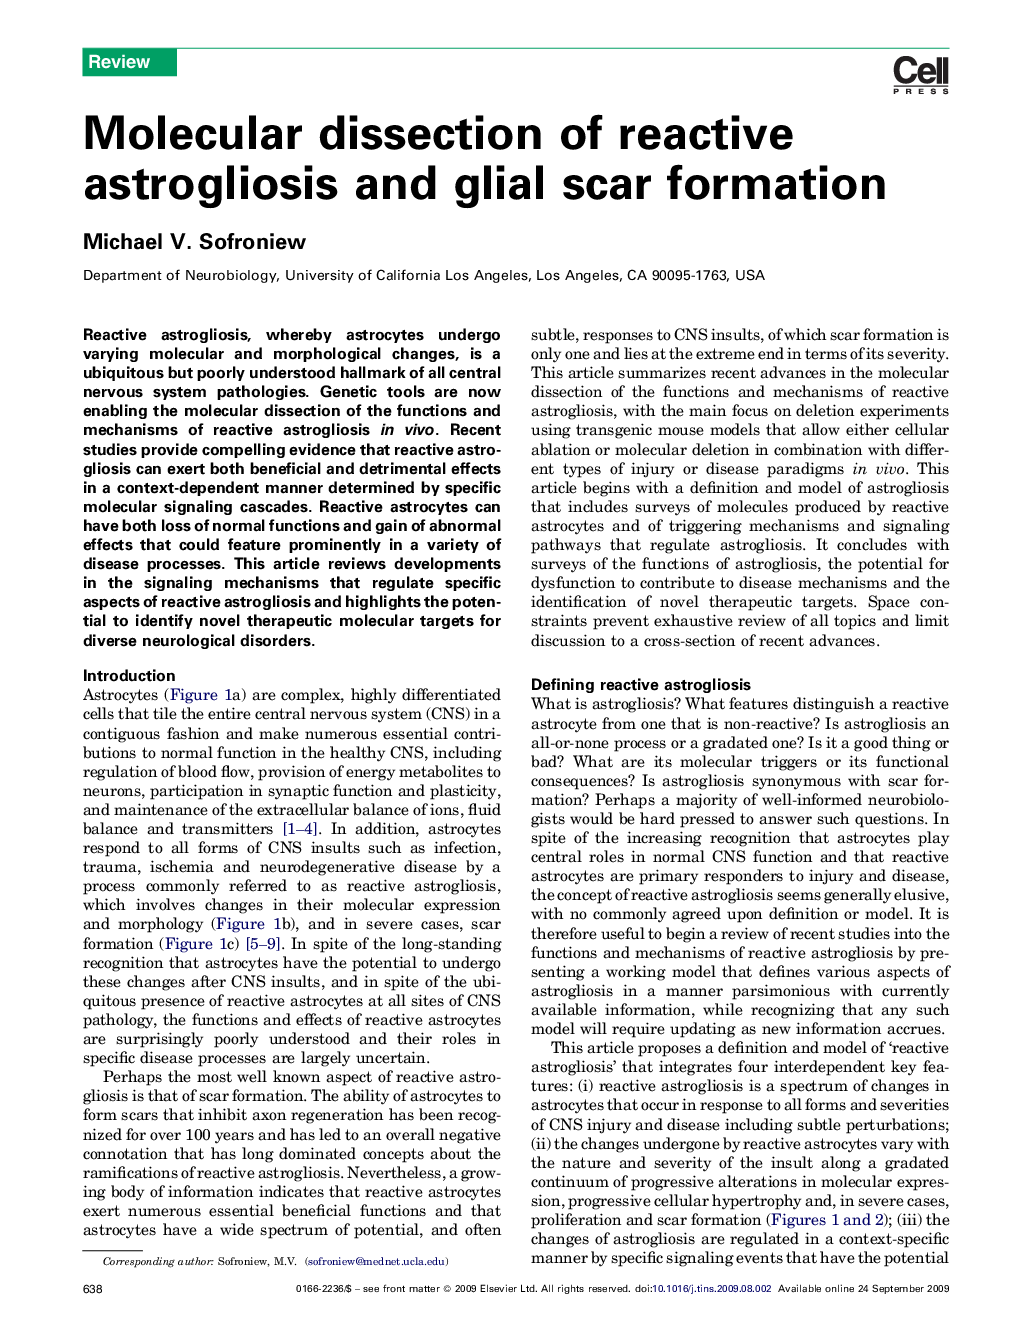 Molecular dissection of reactive astrogliosis and glial scar formation